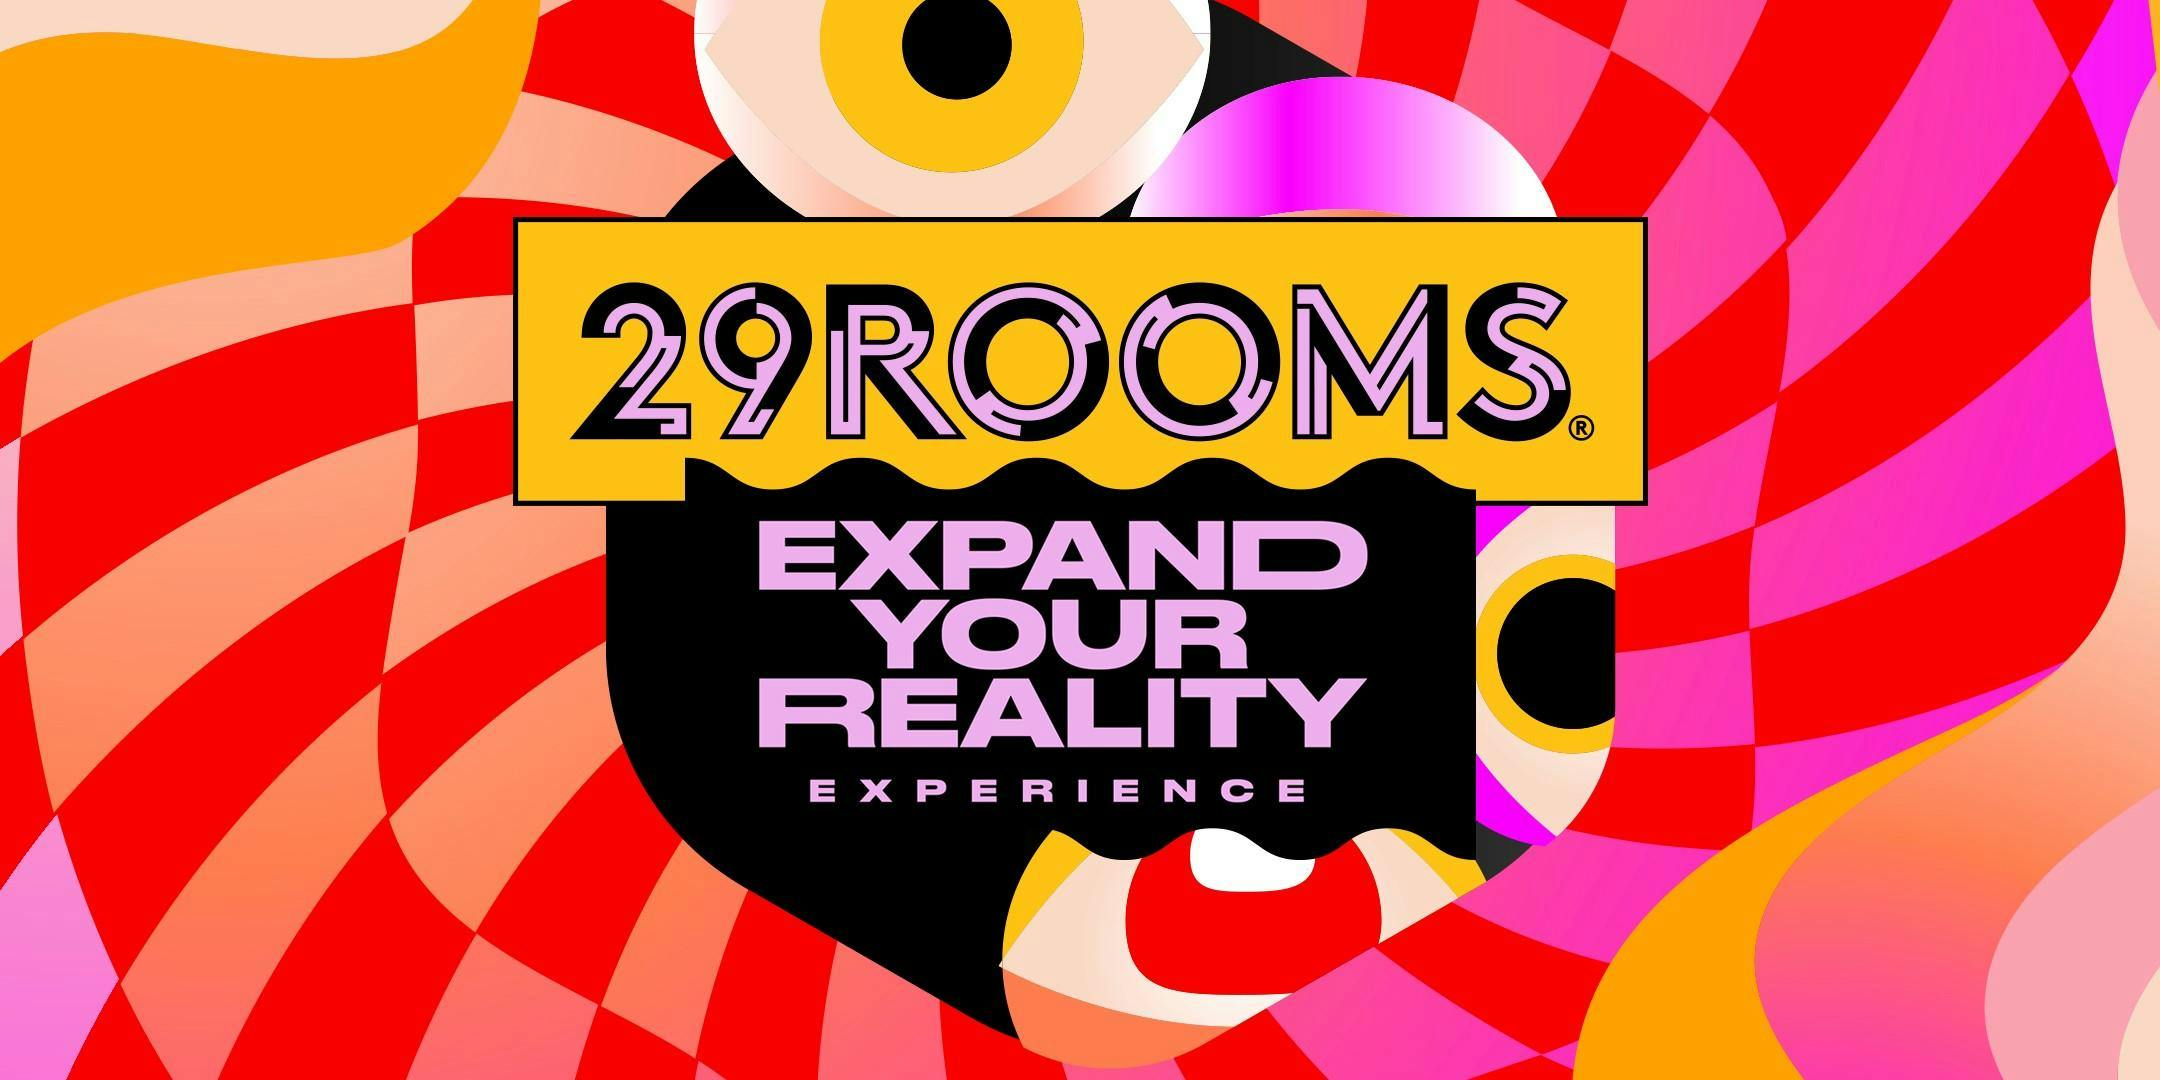 29Rooms Chicago - July 19,2019